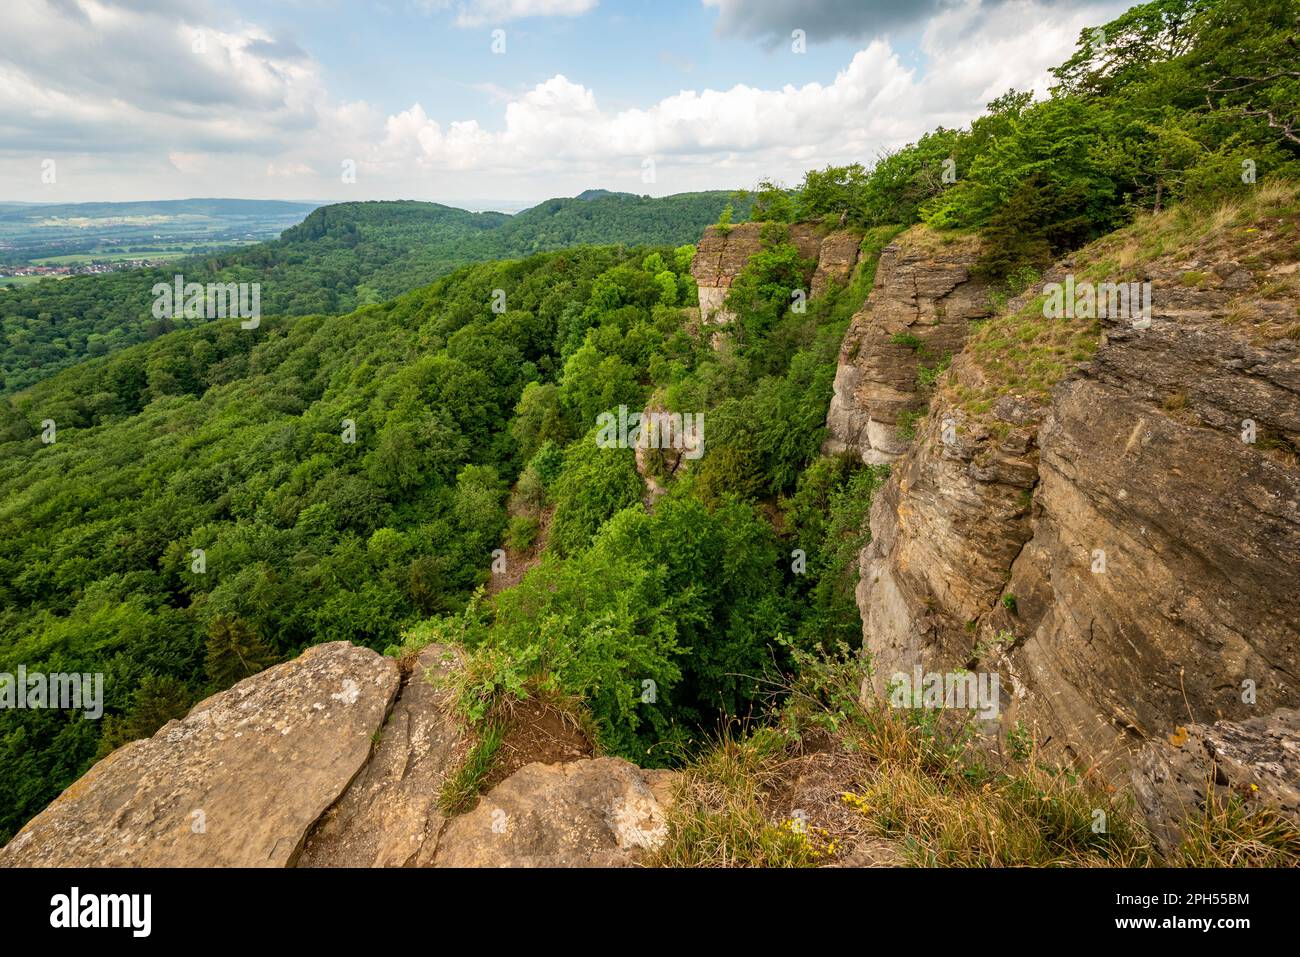 The impressive cliffs and crags of the Hohenstein rock plateau, Hohenstein Nature Reserve, Süntel, Weserbergland, Germany Stock Photo